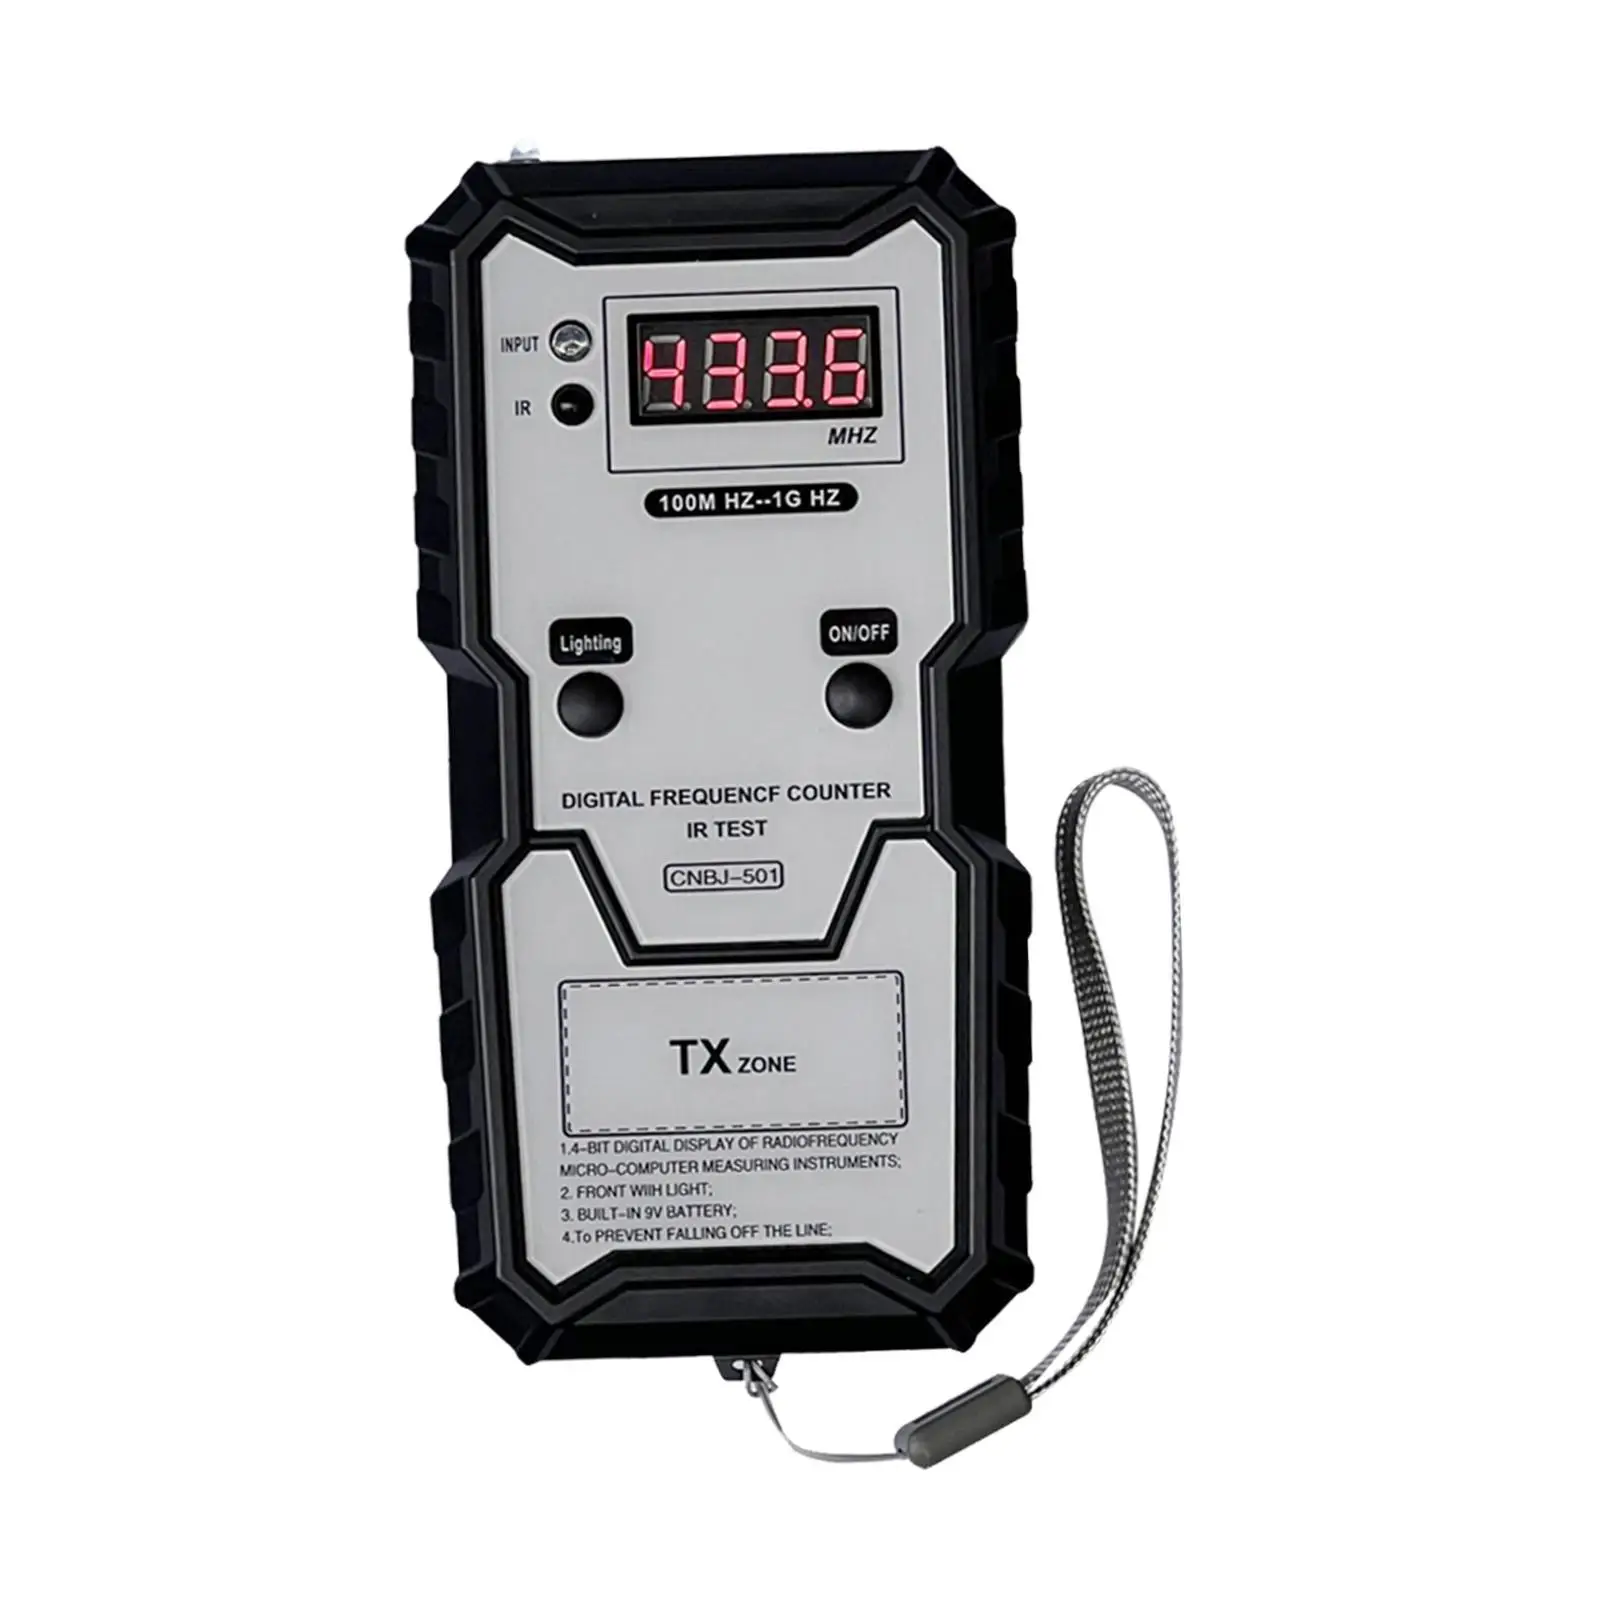 Car Remote Key Infrared Frequency Tester Wireless 4 Bit Digital Display with Indicator Light Detection Test Instrument Detector